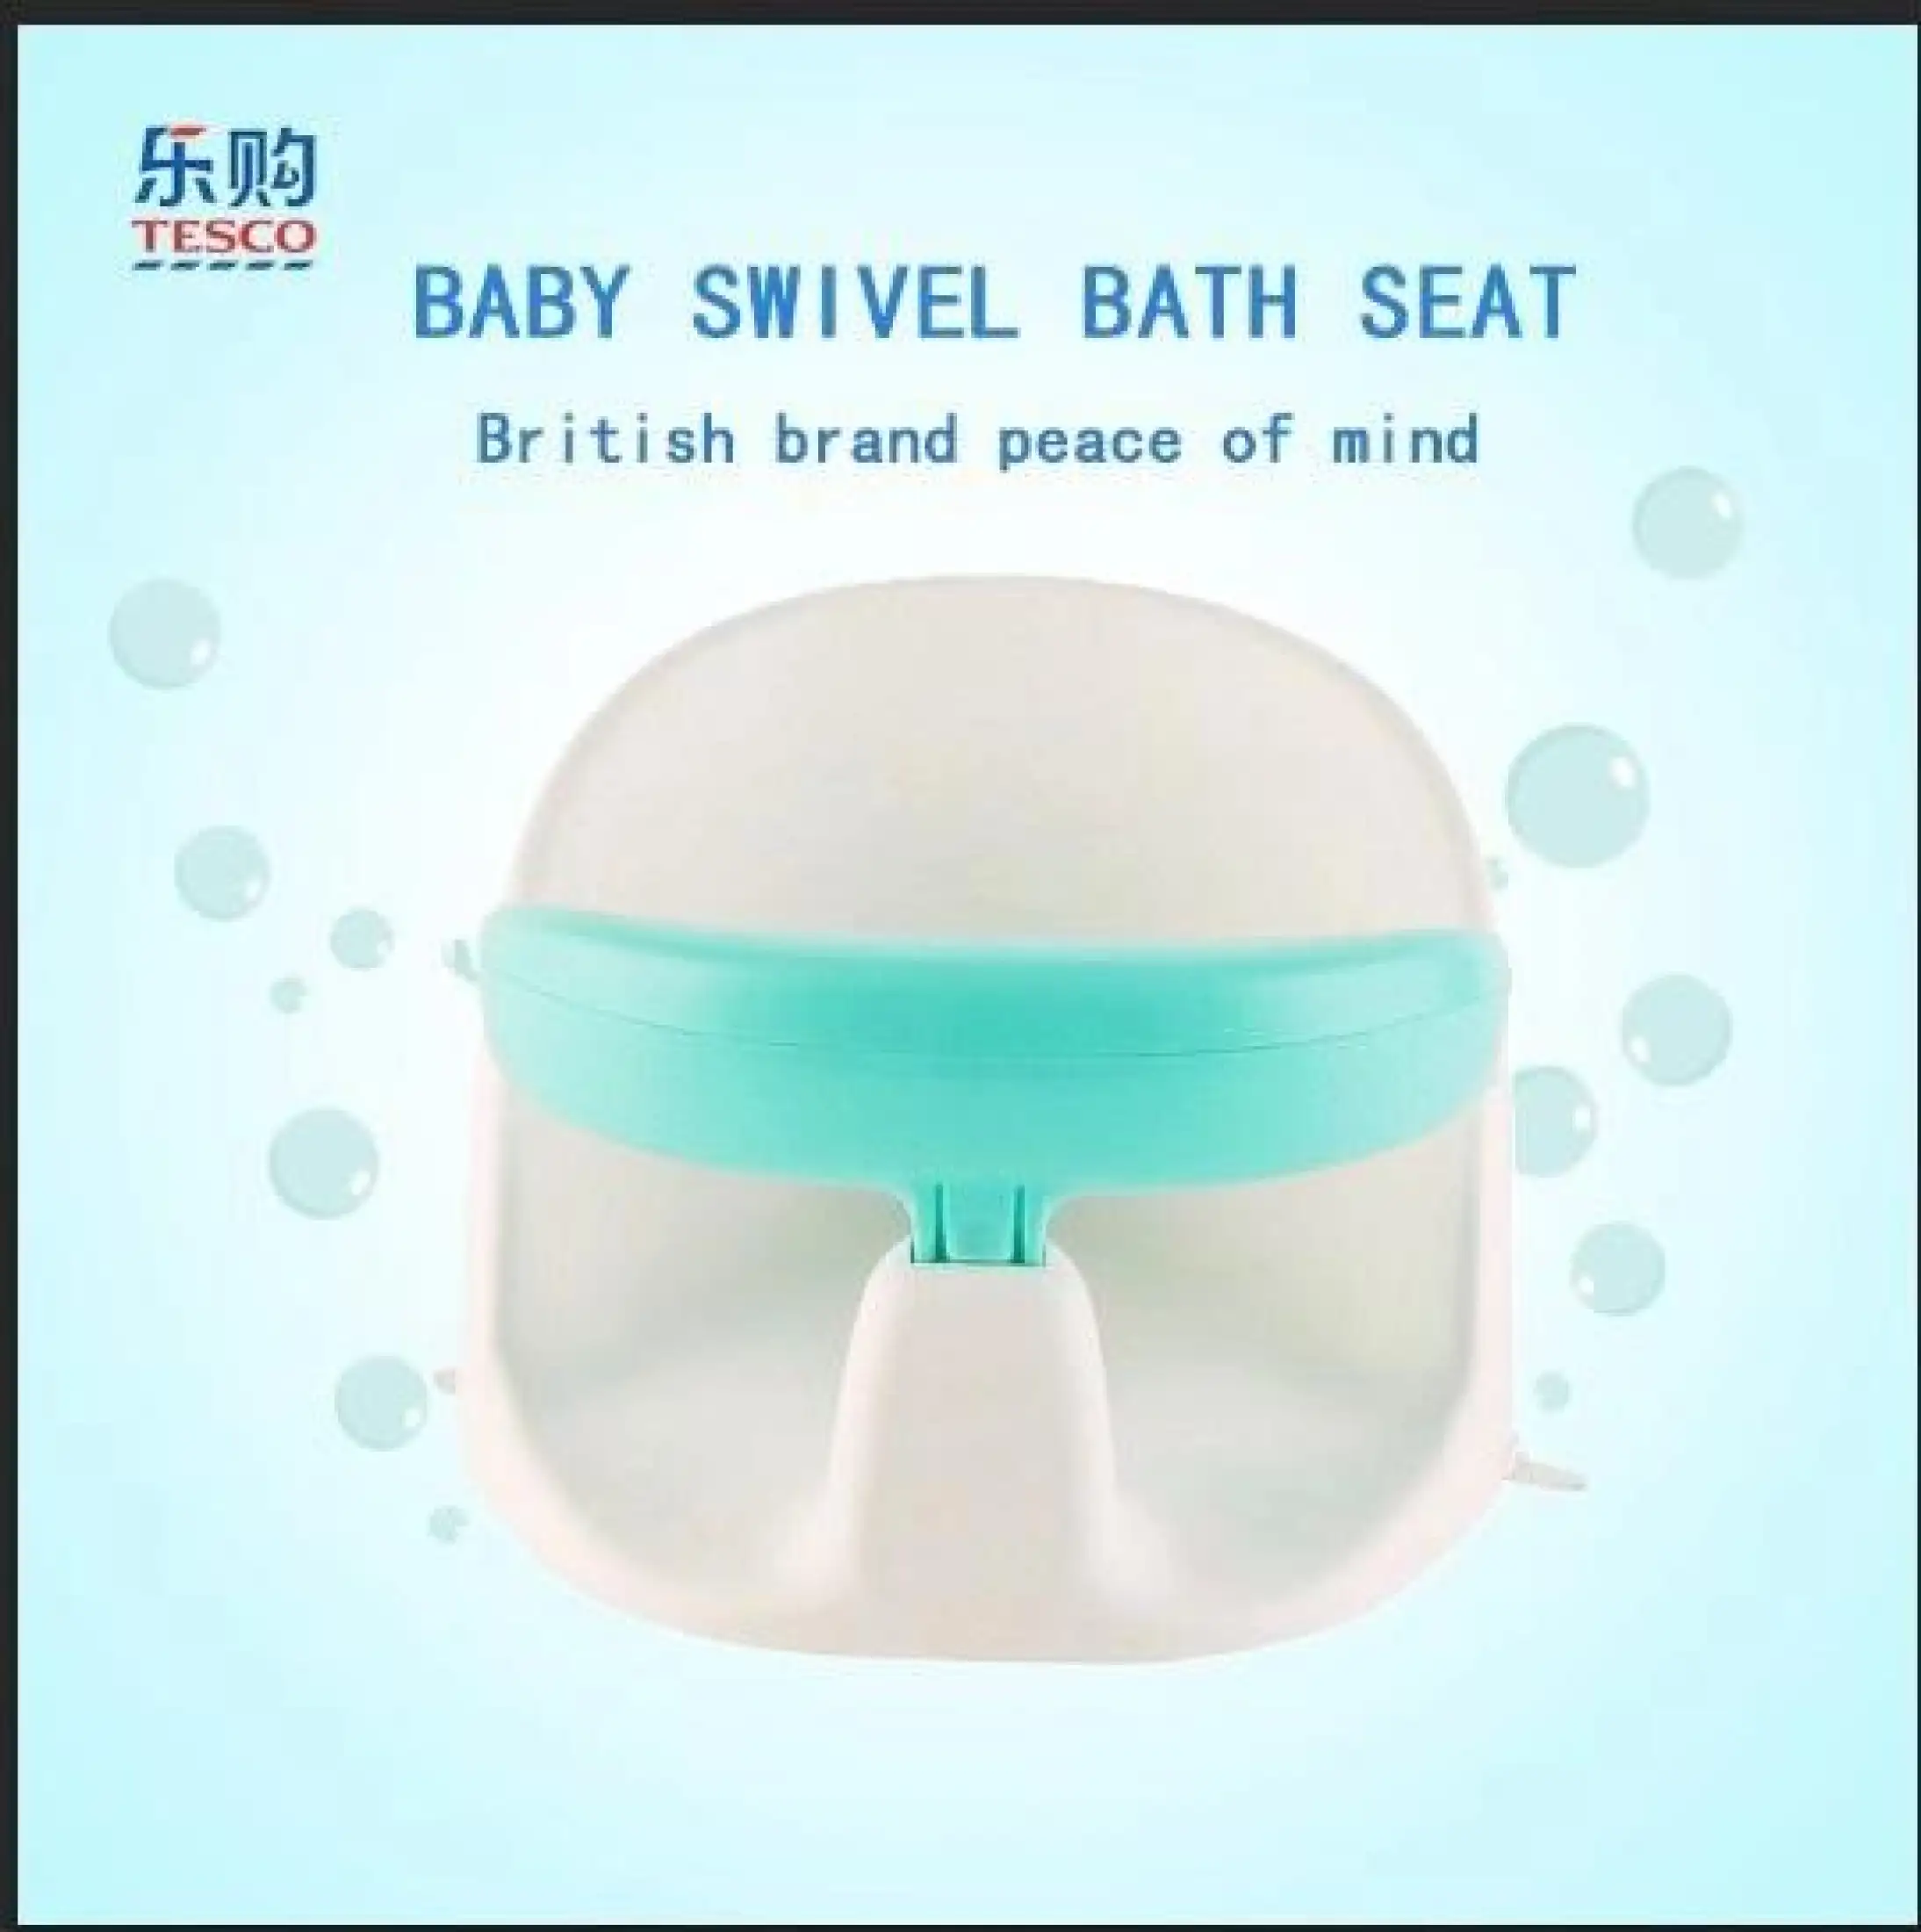 Baby Bath Seat Tesco - 10 Best Baby Bath Seats Uk 2021 Review The Safe Baby Hub - When it comes to bathing your infant, a baby bath seat can make the process safer and some bath seats for babies have suction cups that can hold the seat to the side walls of your tub for added stability, while others sit independently in a.